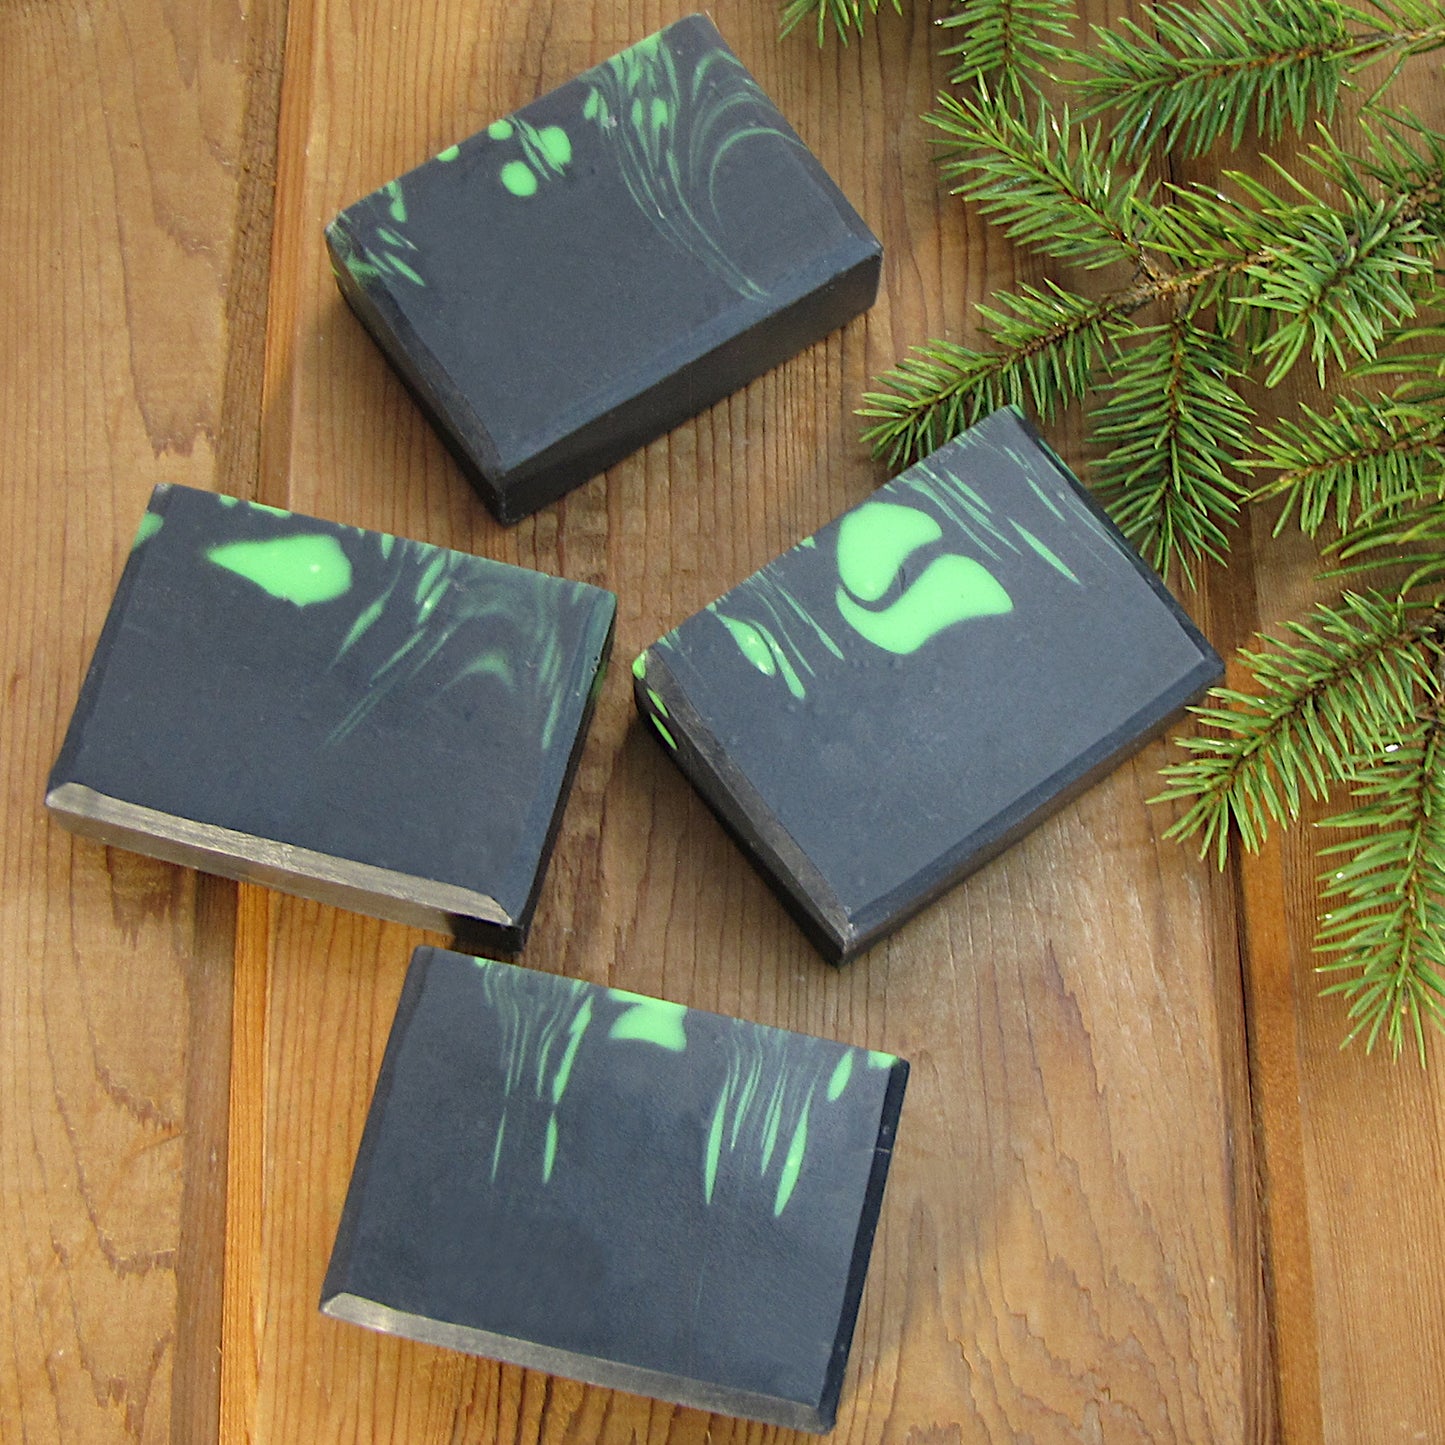 Mountain Man, Pine Scented Charcoal soap